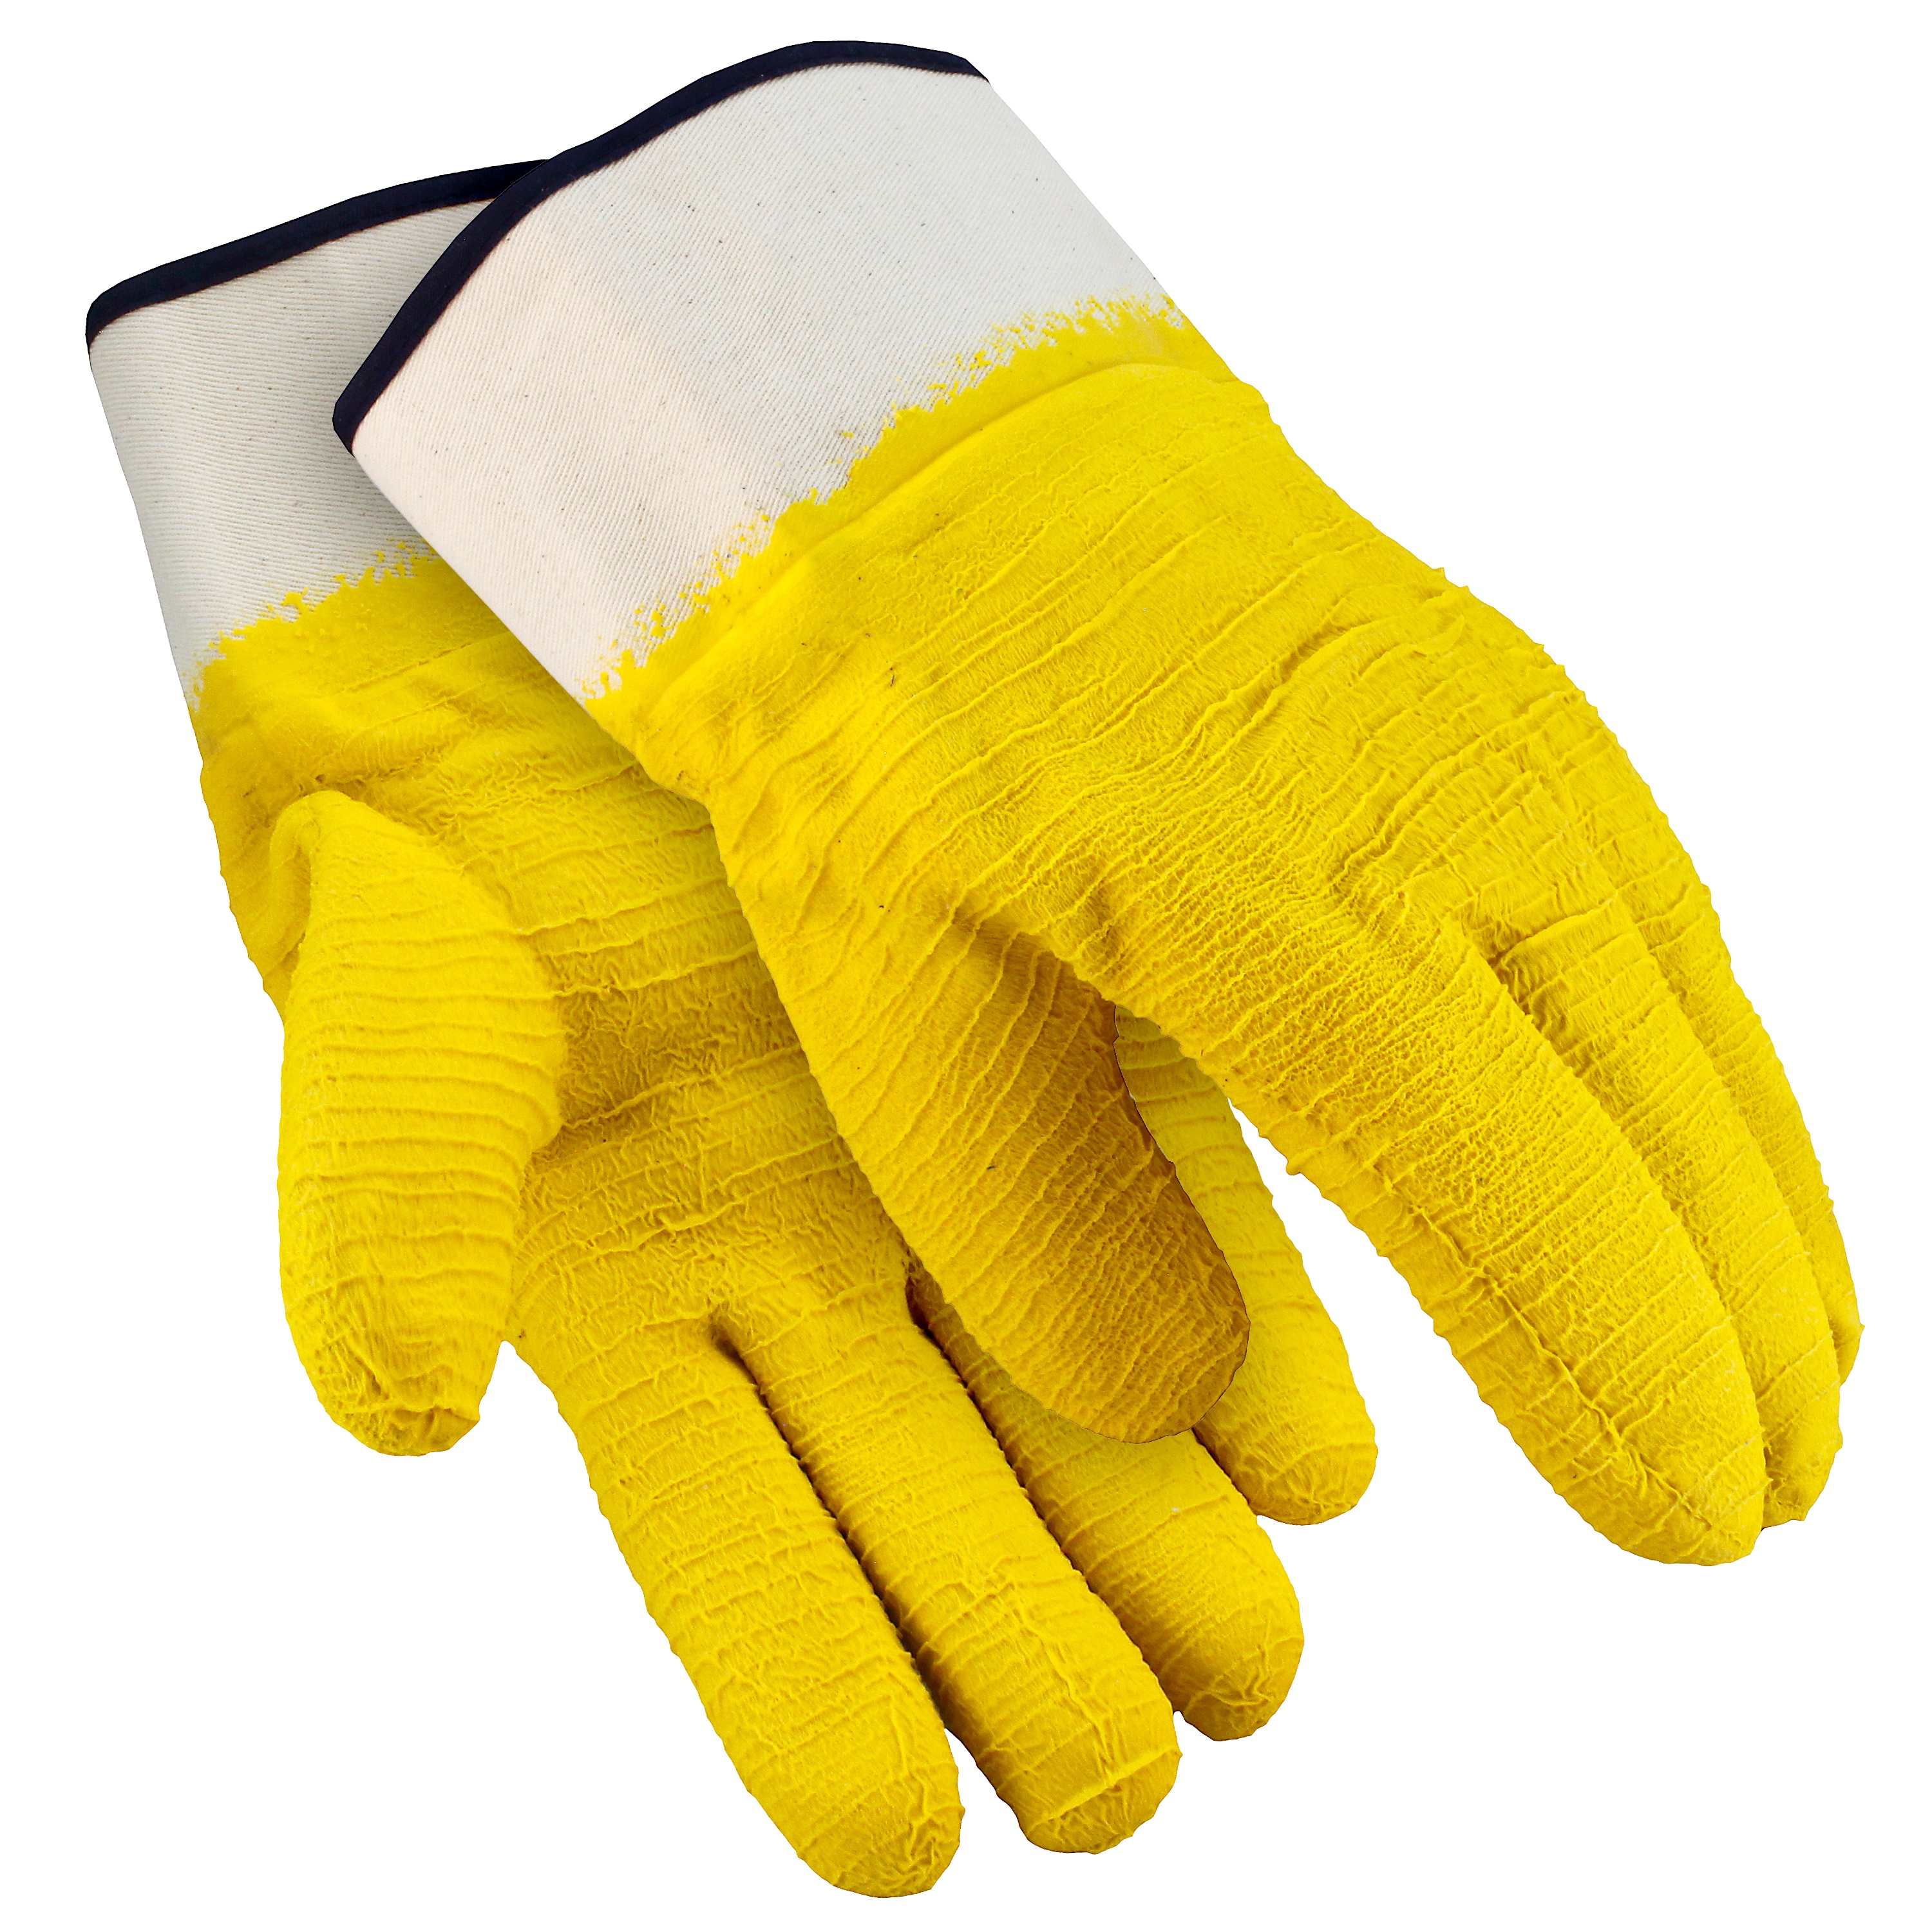 Glacier Grip Insulated Rubber Coated Gloves, Safety Cuff, 1 Pair